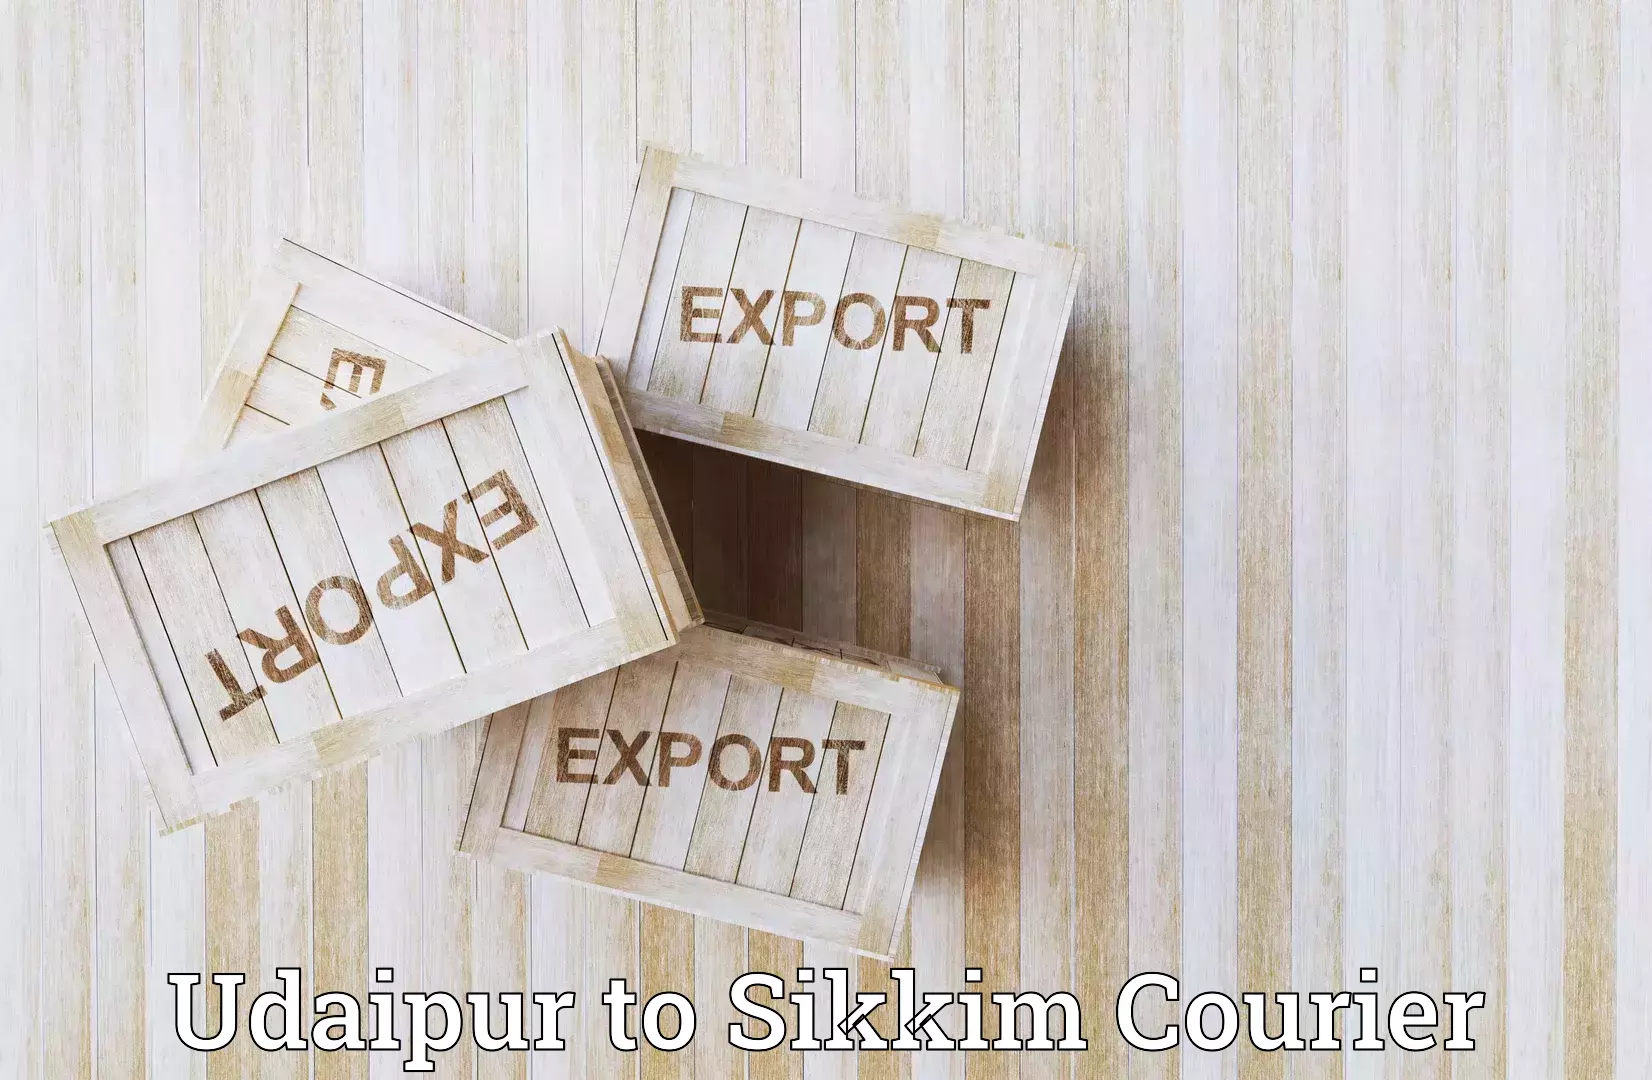 Global shipping networks Udaipur to North Sikkim